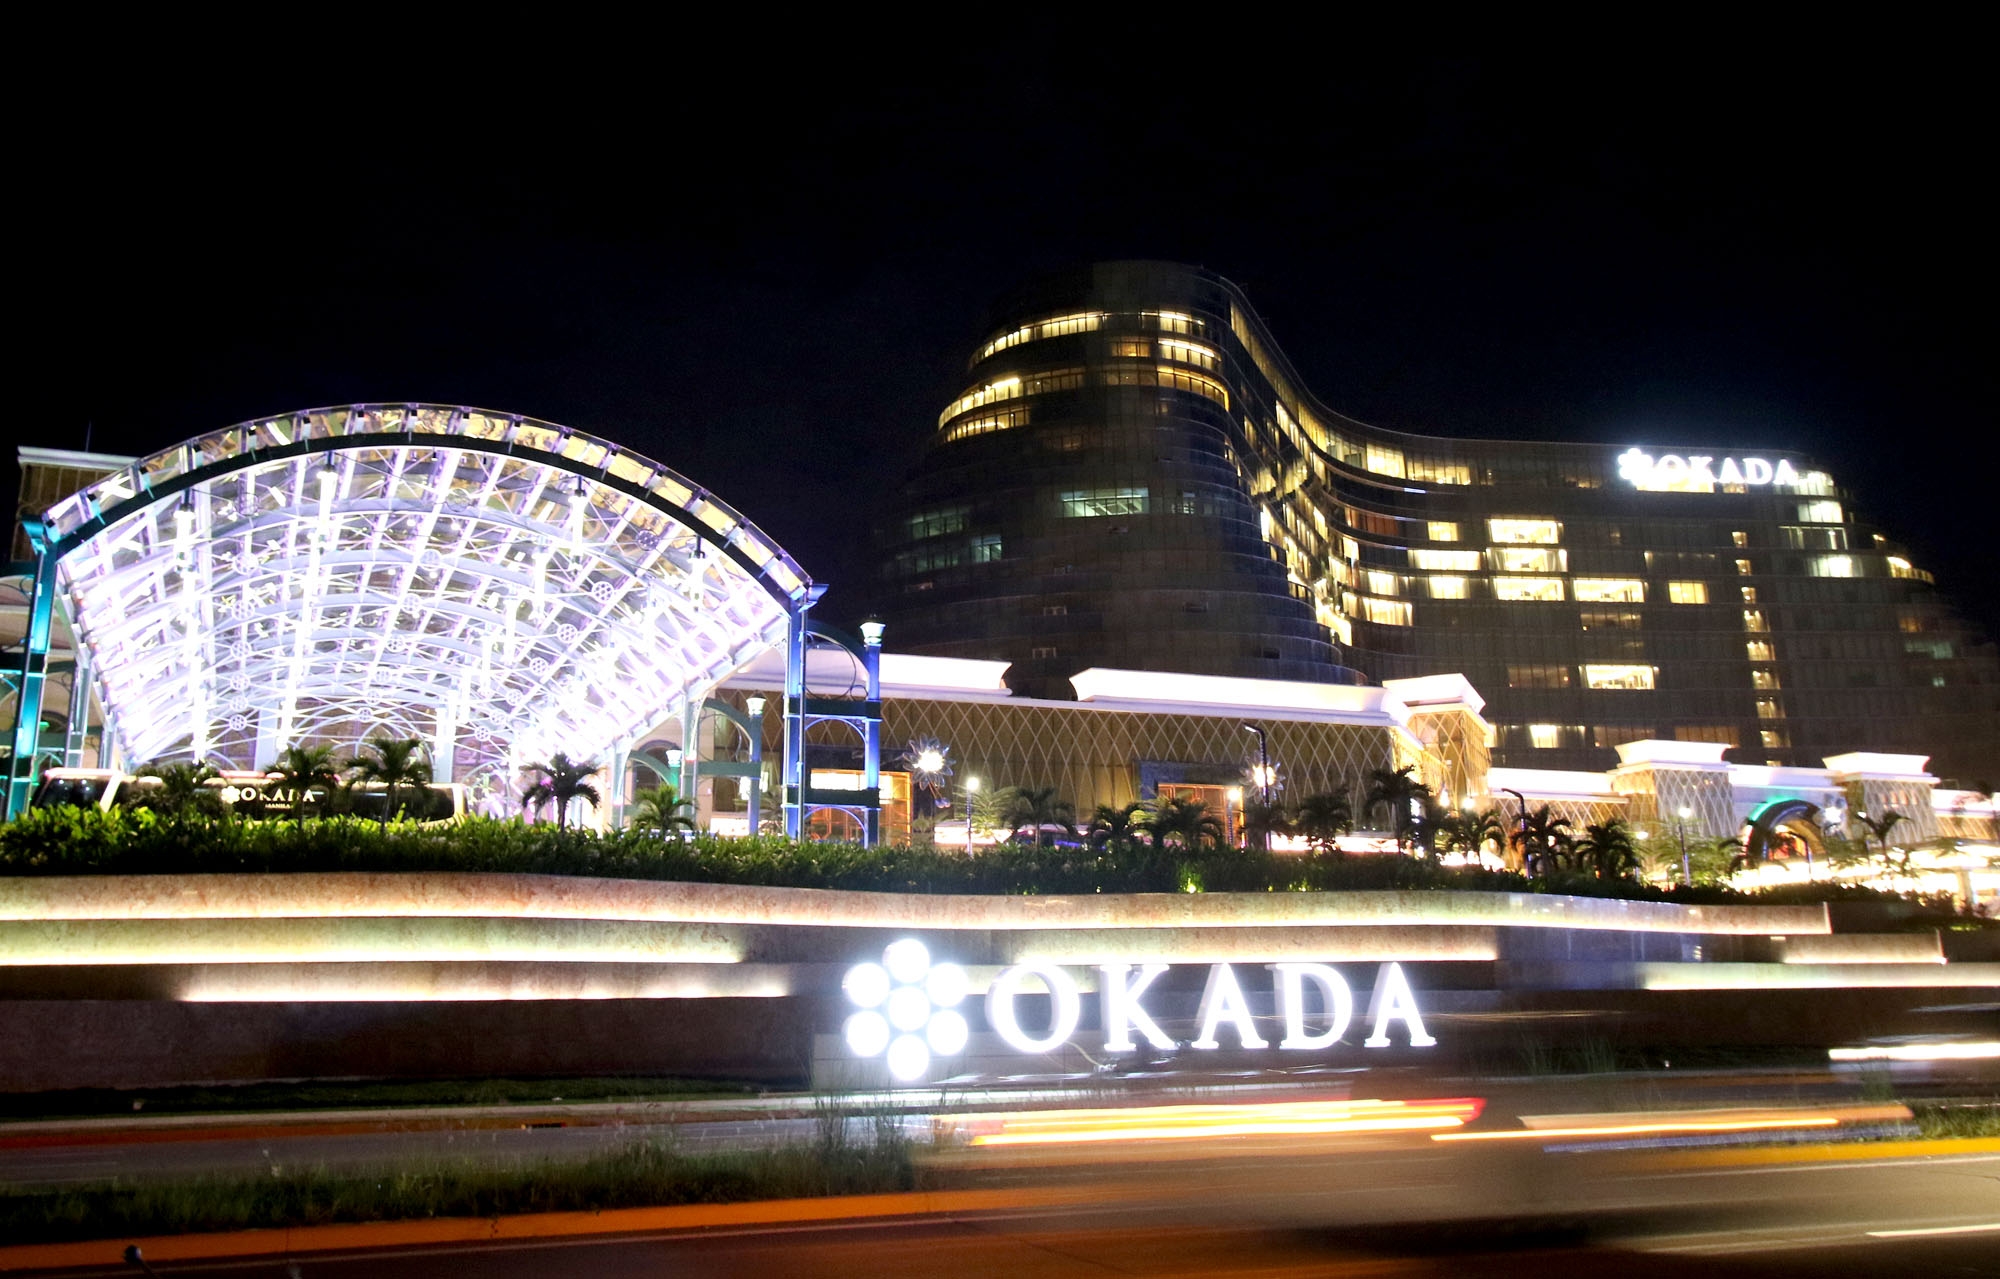 Okada group forcibly takes control of casino-hotel